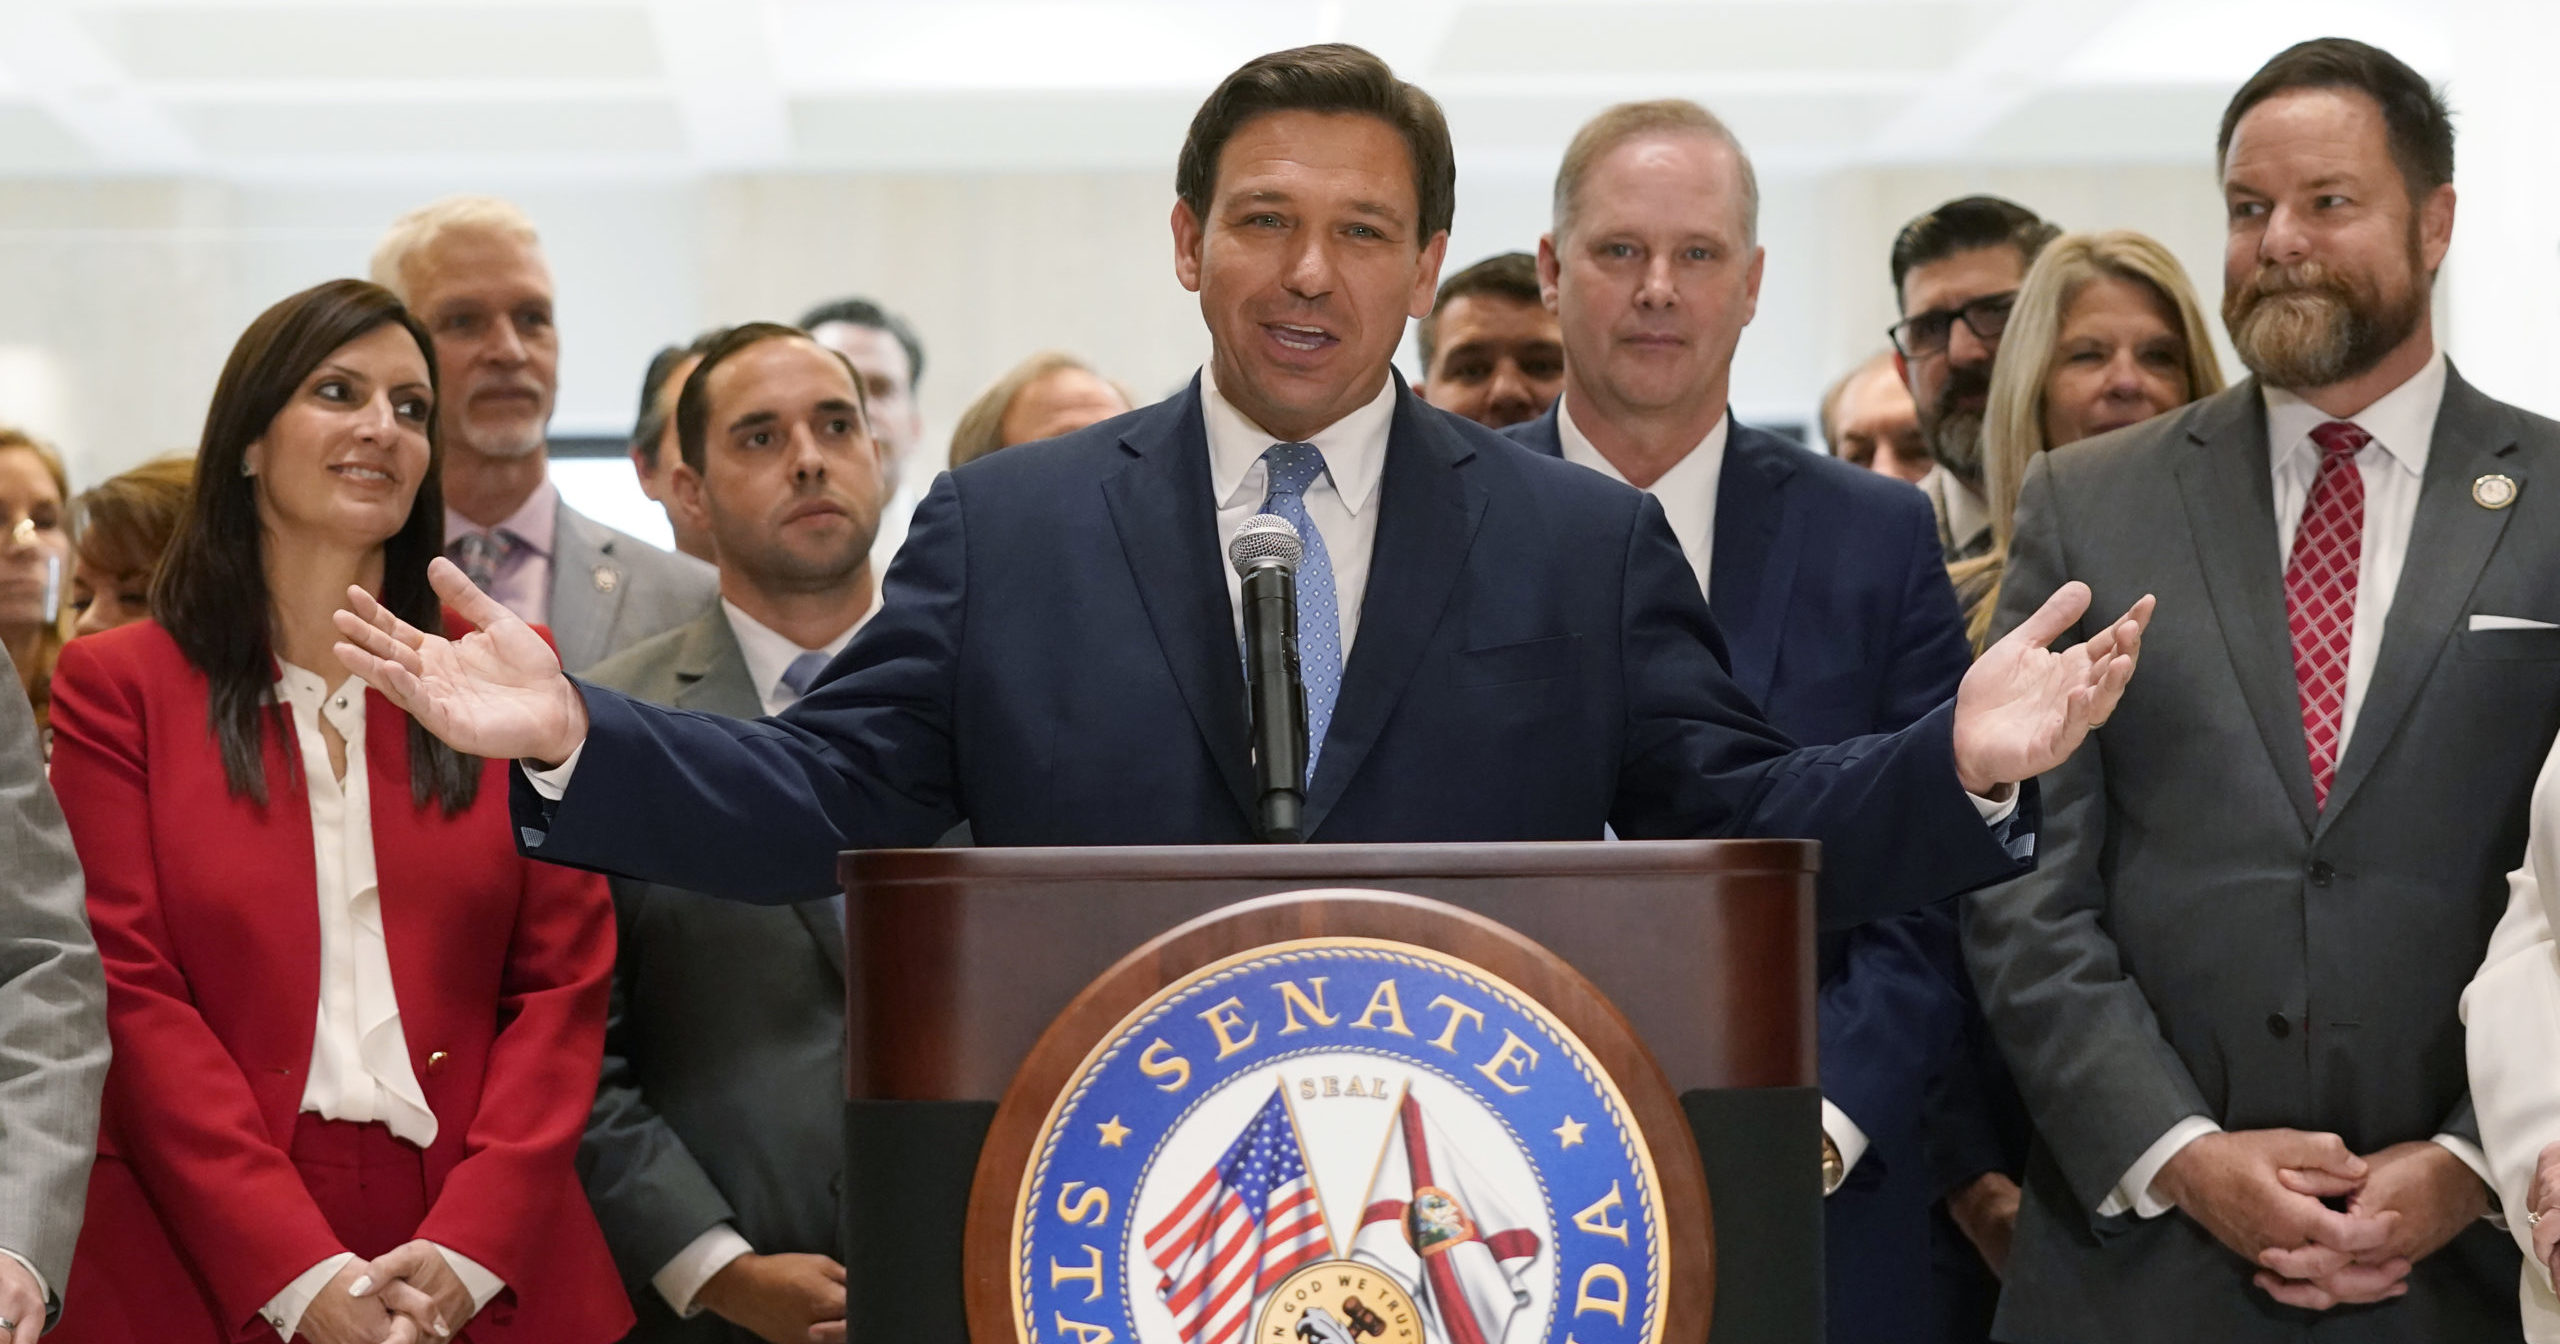 Surrounded by lawmakers, Florida Gov. Ron DeSantis speaks at the end of a legislative session Friday at the Capitol in Tallahassee, Florida.